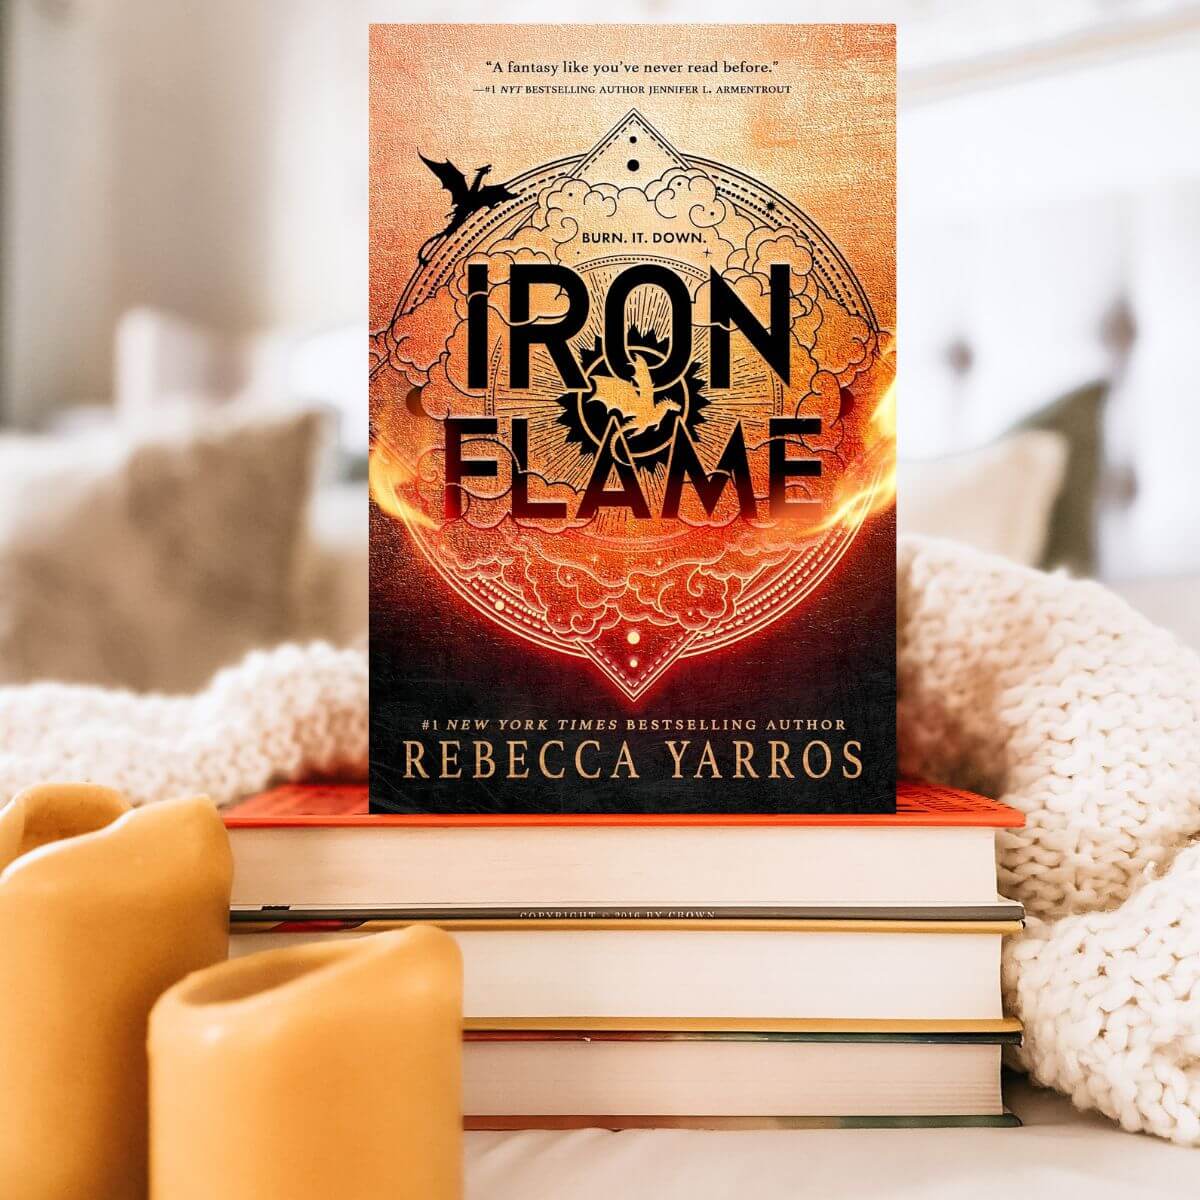 #FourthWing fans... today is a big day! IRON FLAME by @RebeccaYarros releases, book two in the series! Comment below everything you'll be dropping today in order to make time for reading this highly anticipated sequel. shereads.com/?p=51172&previ…